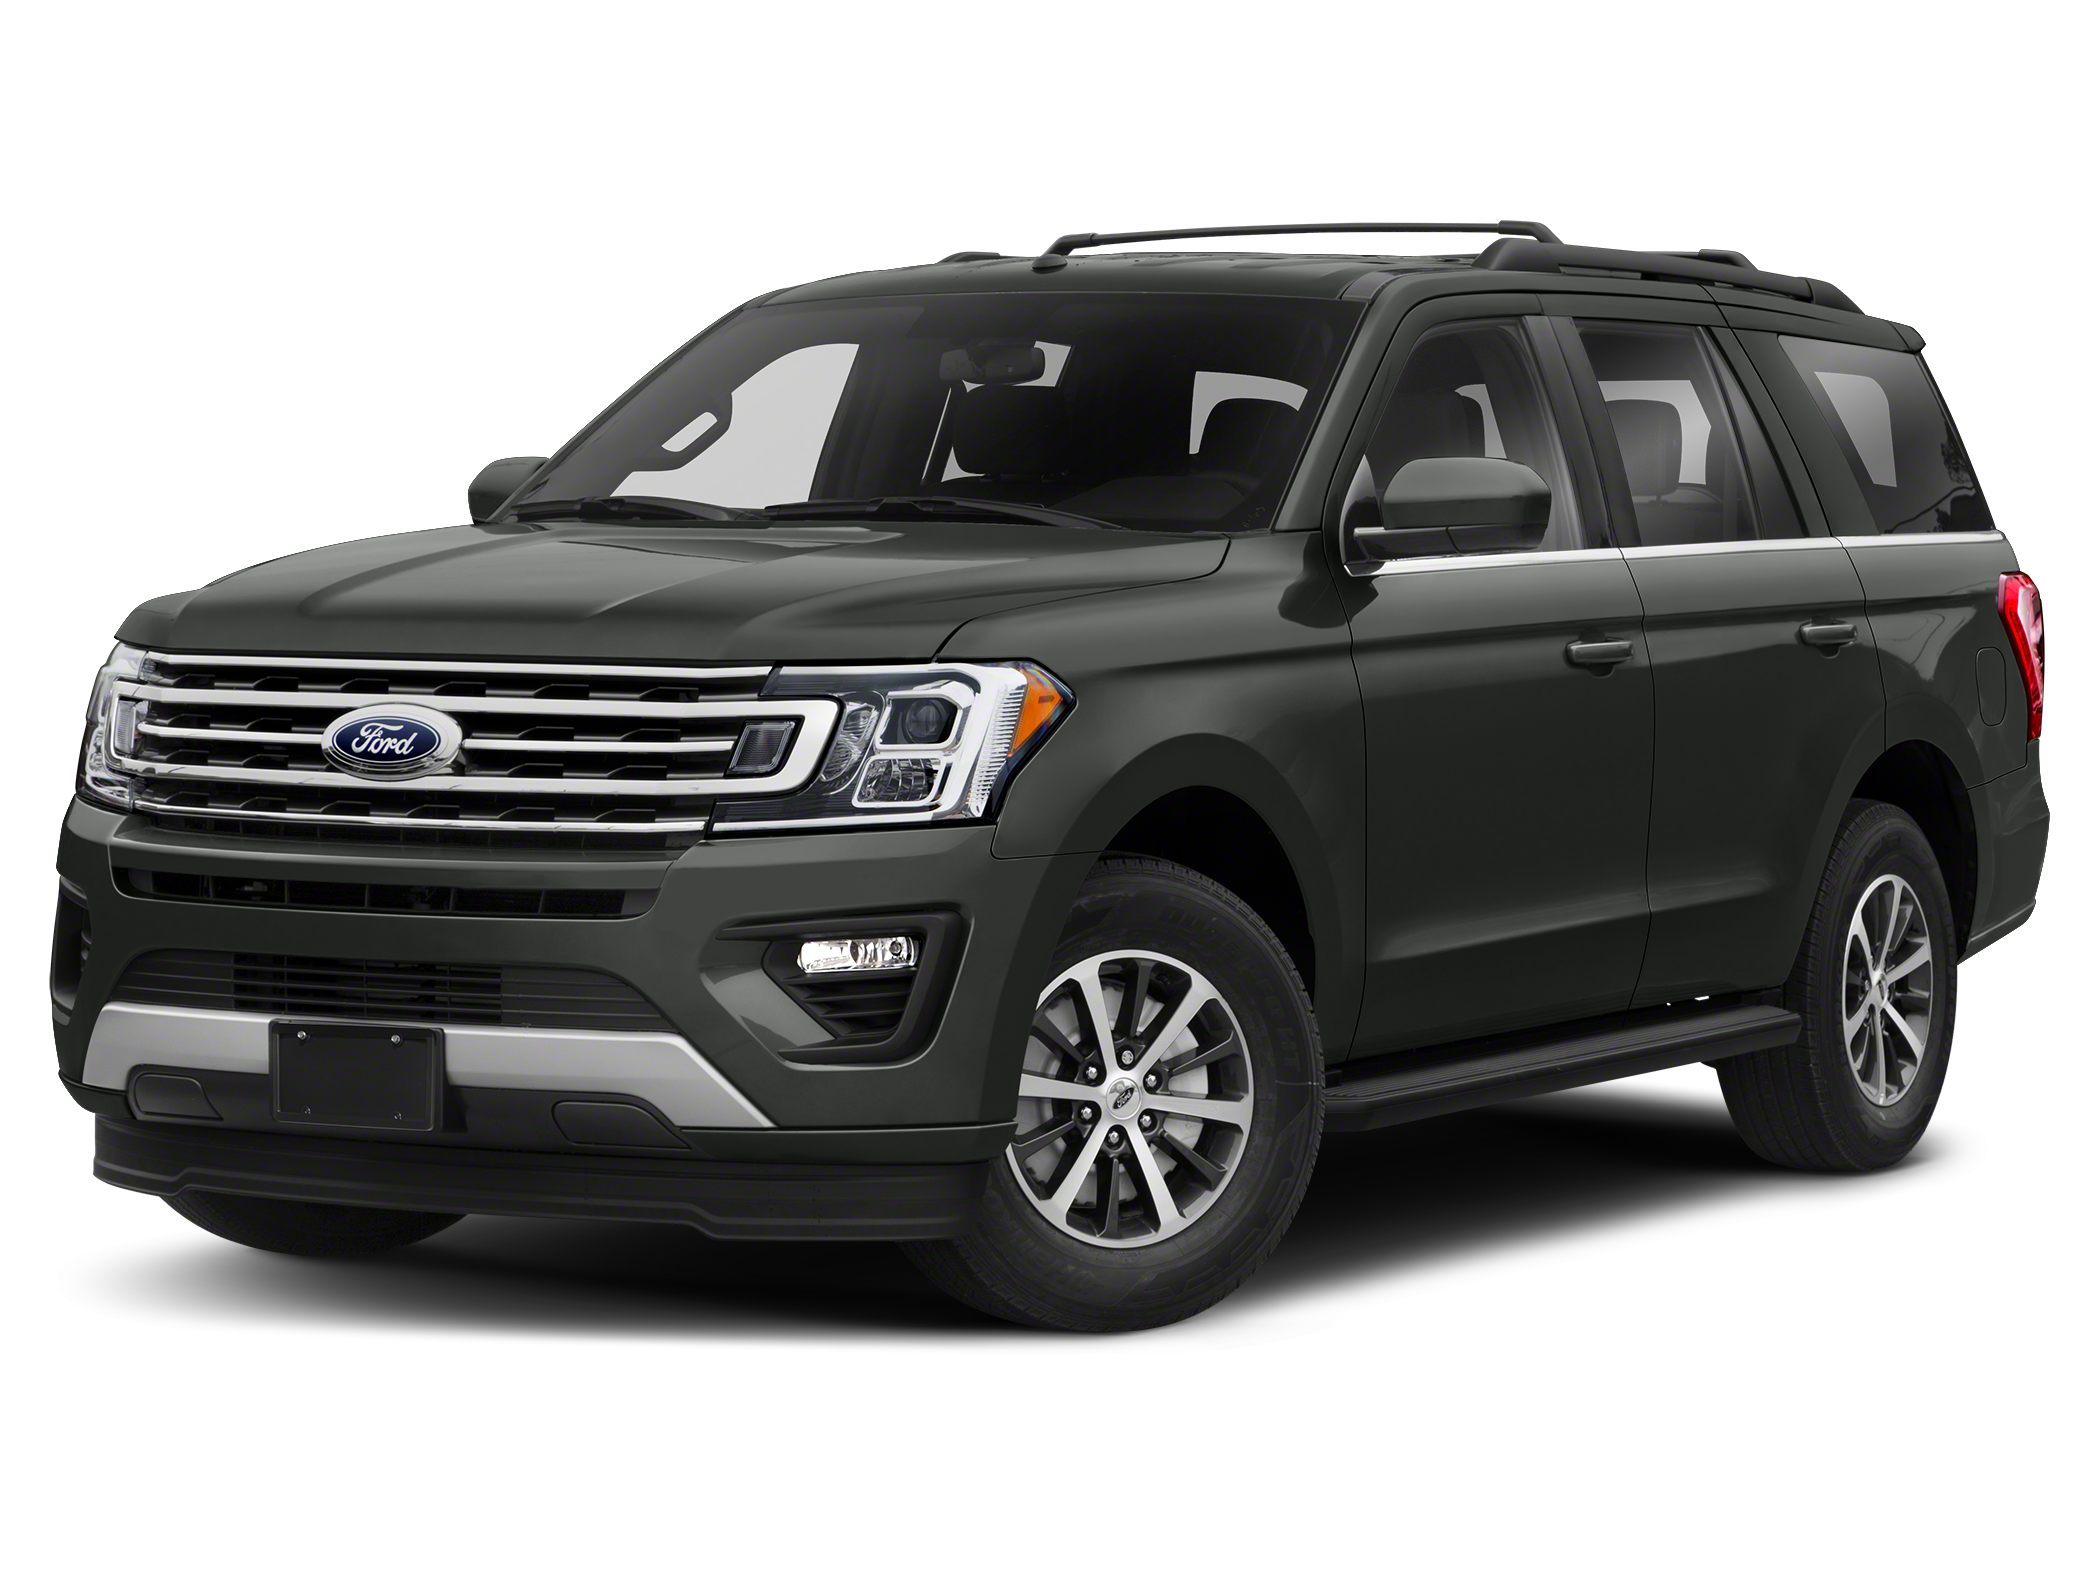 2019 Ford Expedition SUV 